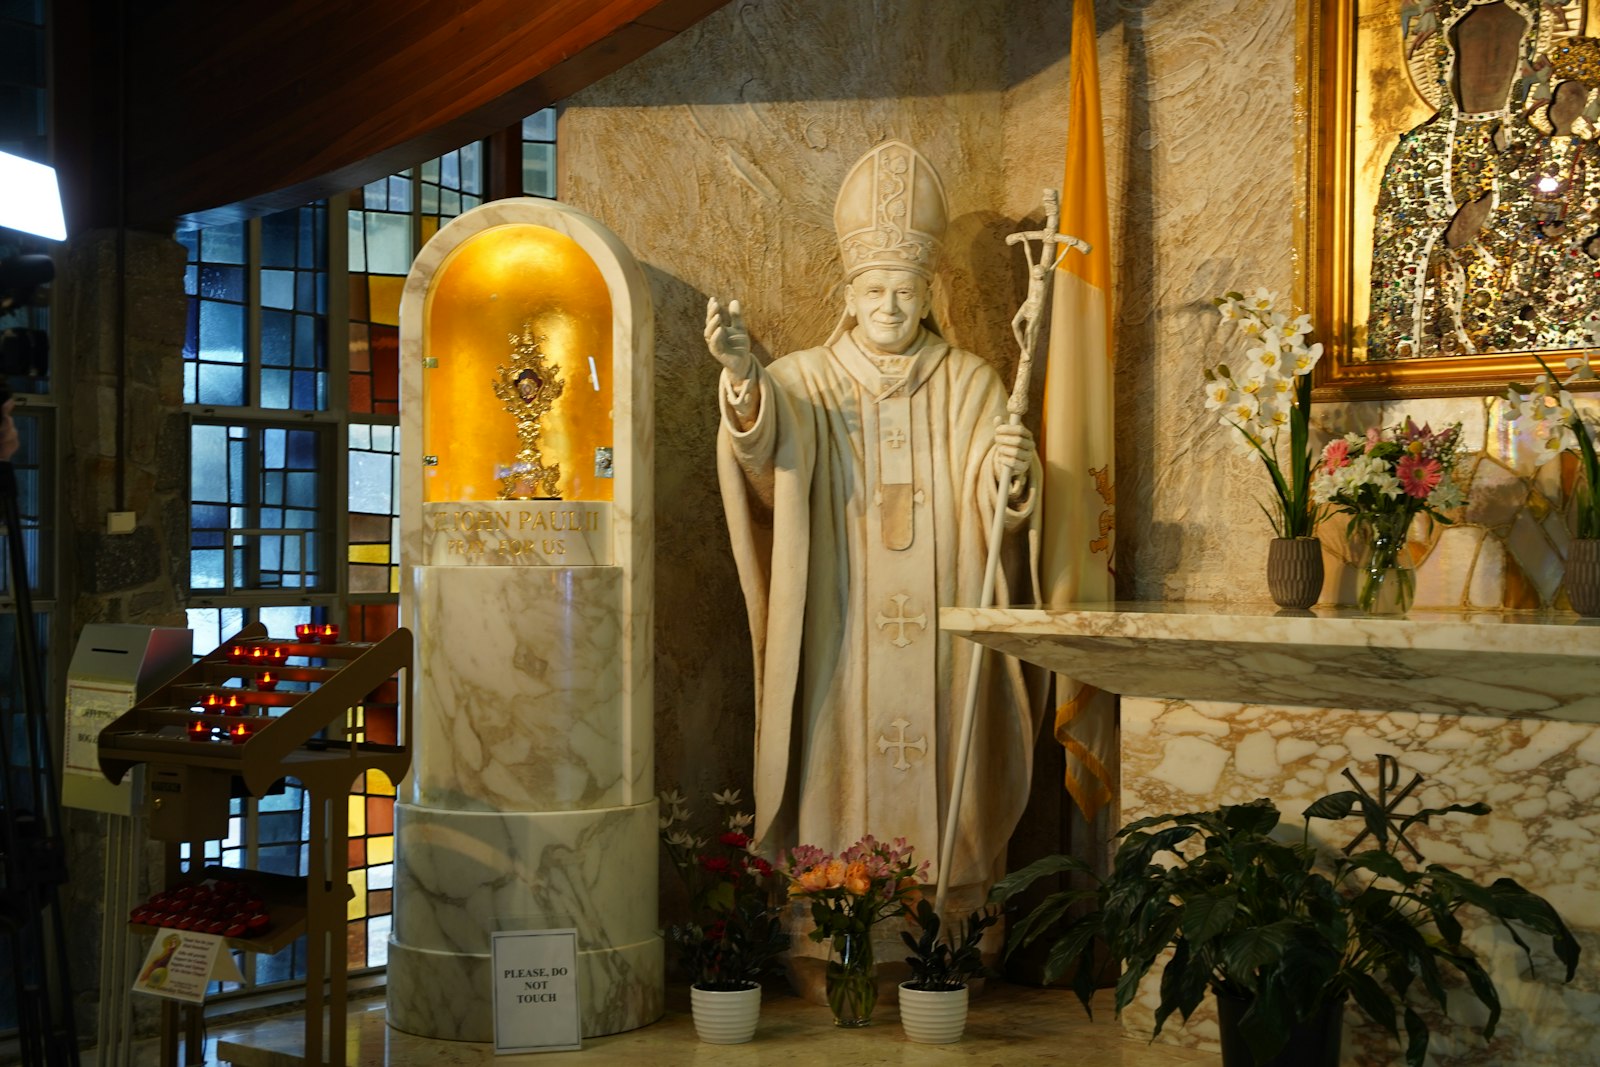 The archdiocesan Shrine of St. John Paul II is located in the Chapel of Our Lady of Orchard Lake, at the center of the schools' campus. Fr. Witek would like the shrine to be a more prominent place of pilgrimage in southeast Michigan.